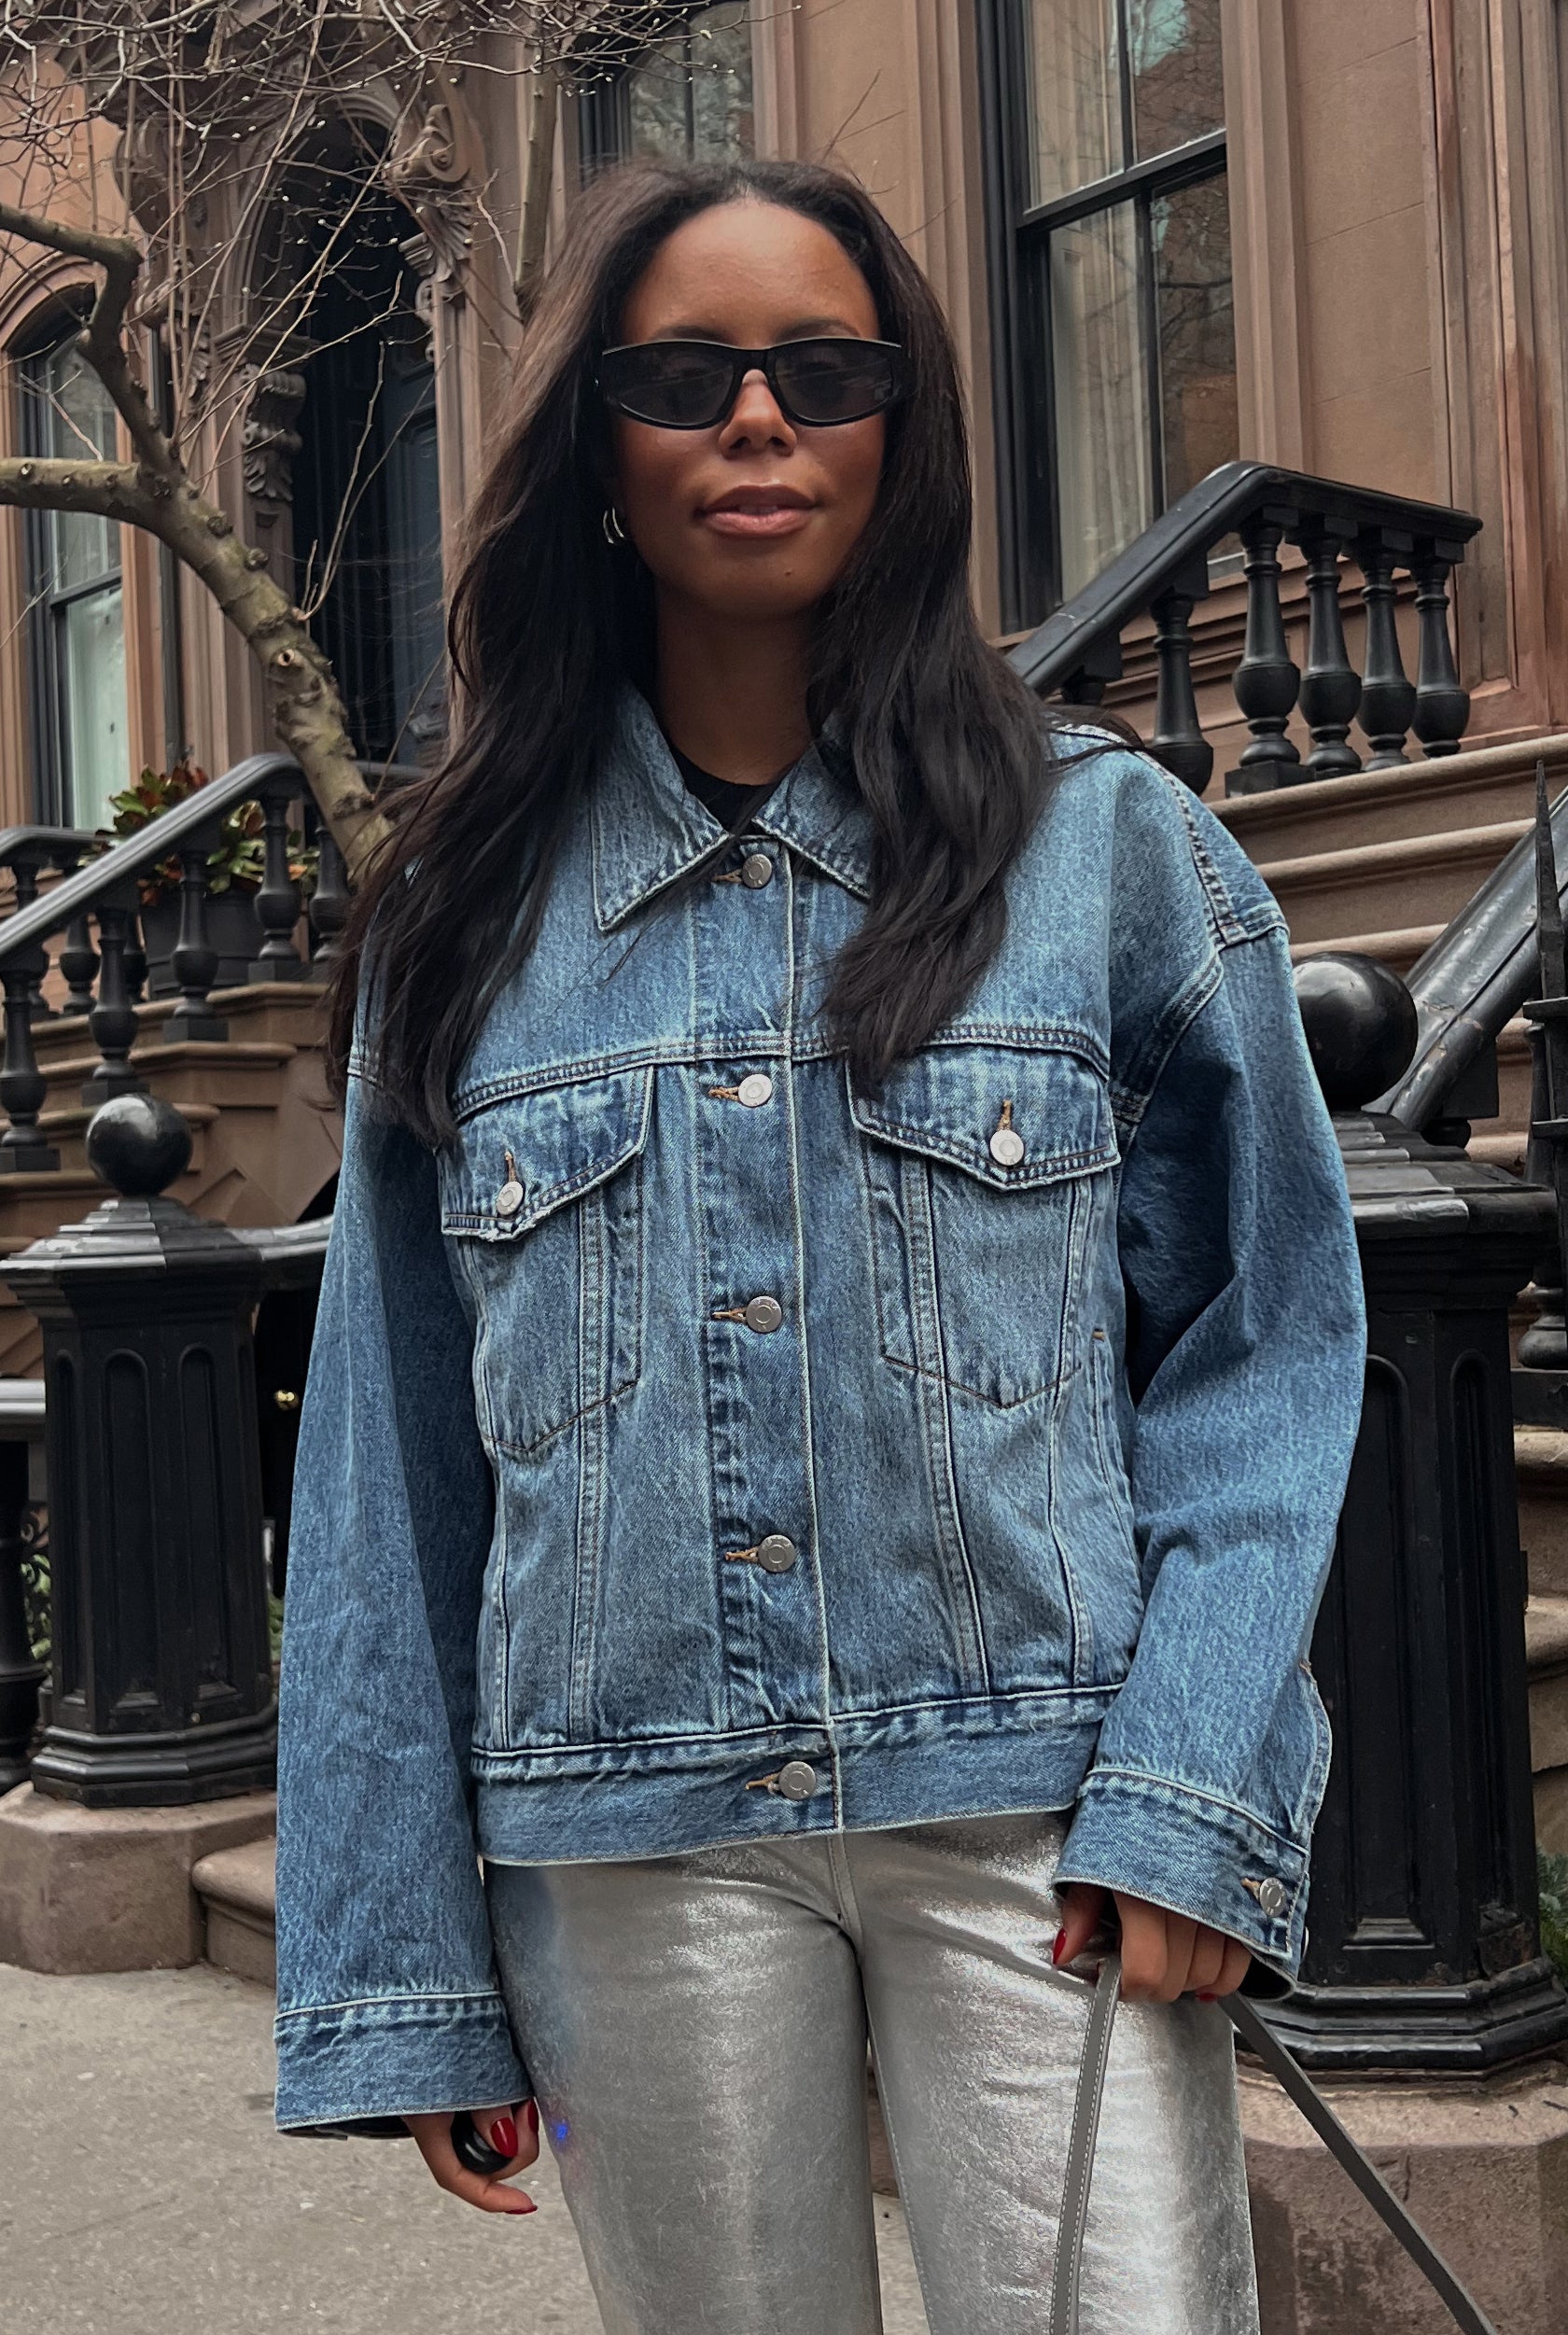 Is 60 too old to wear a denim jacket? - Quora